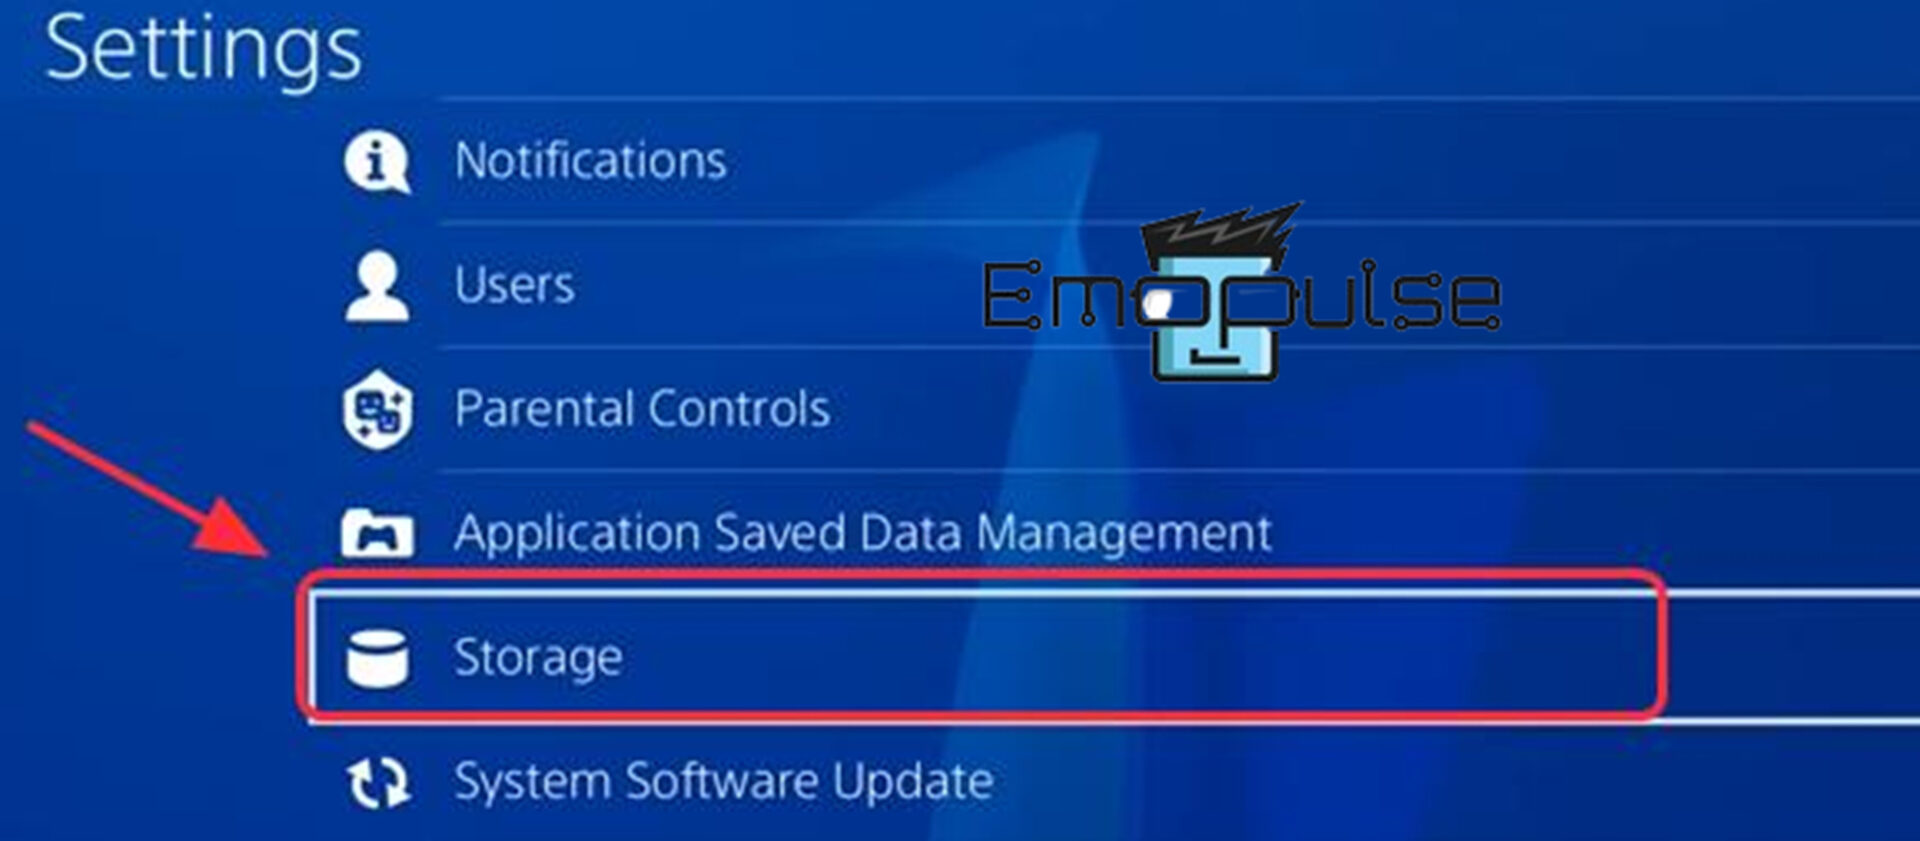 Storage in PS4 settings